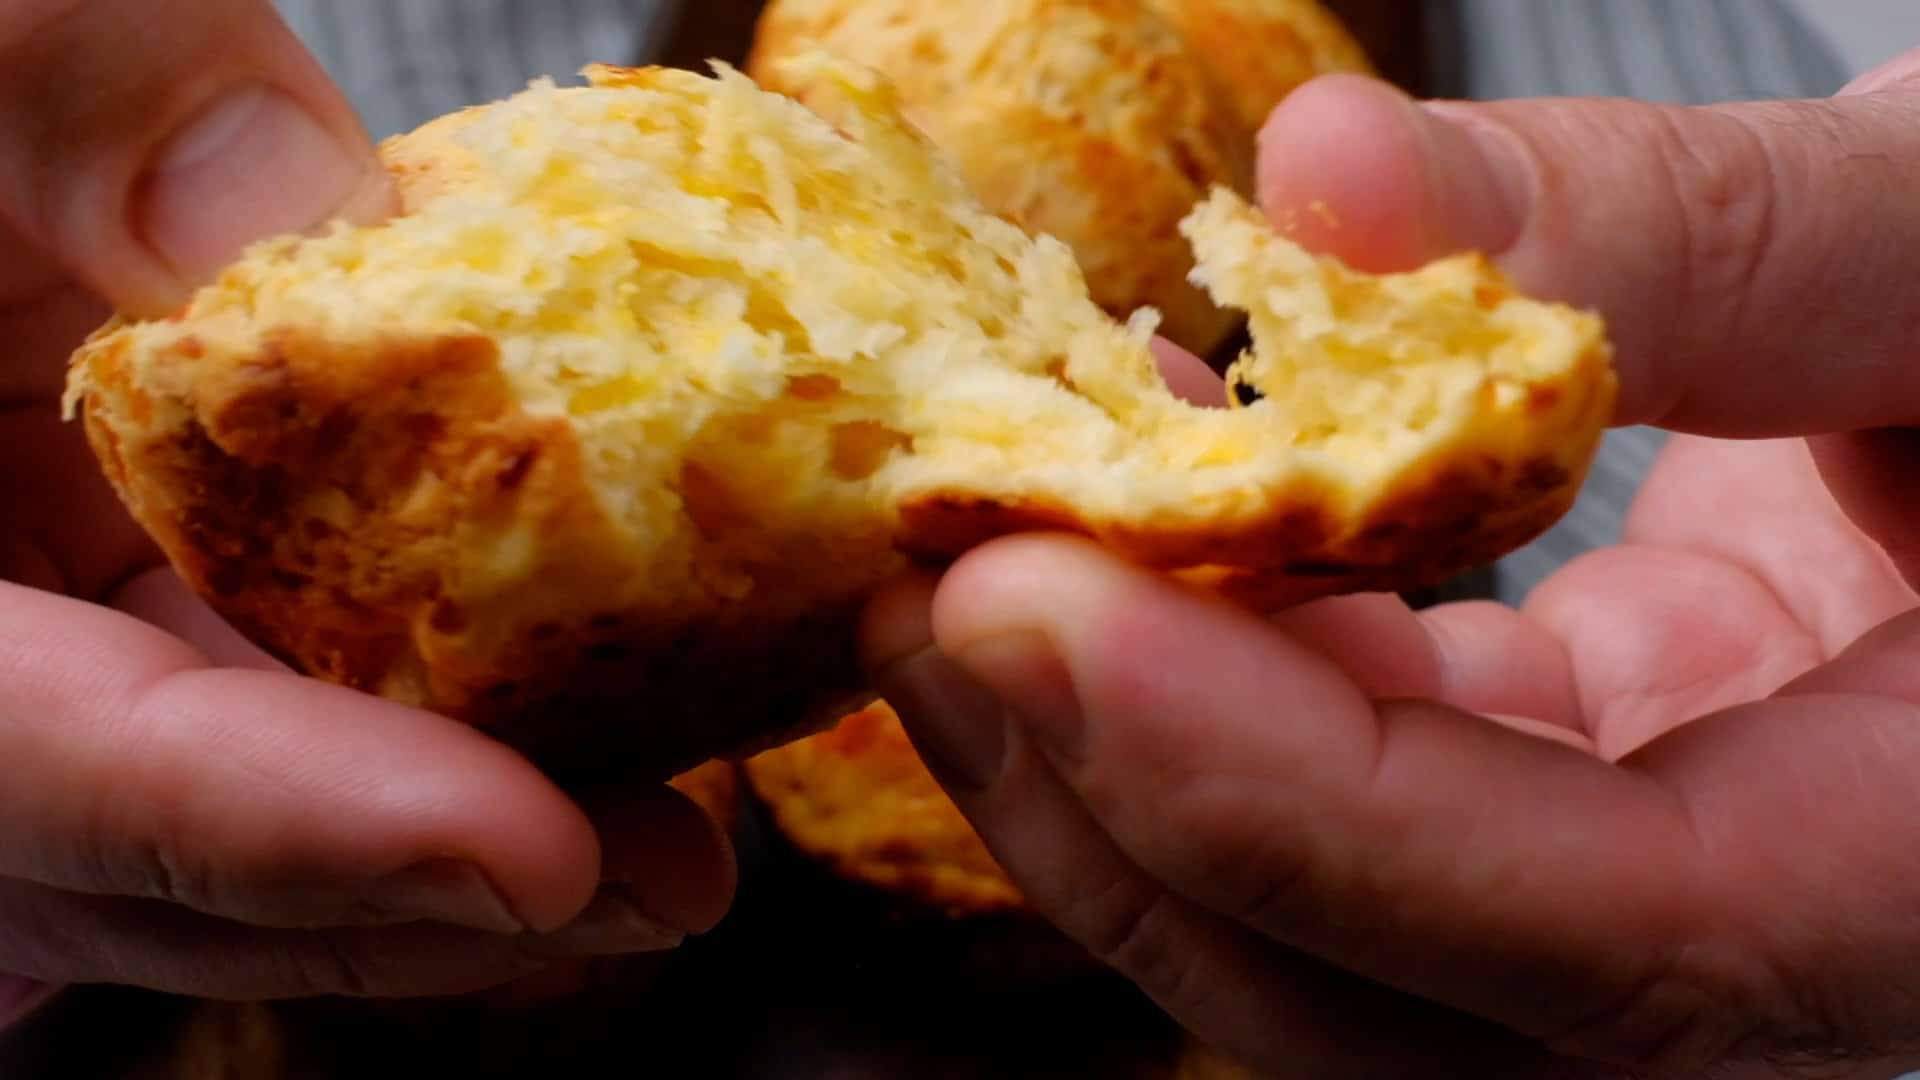 Inside of the baked cheddar bread rolls.